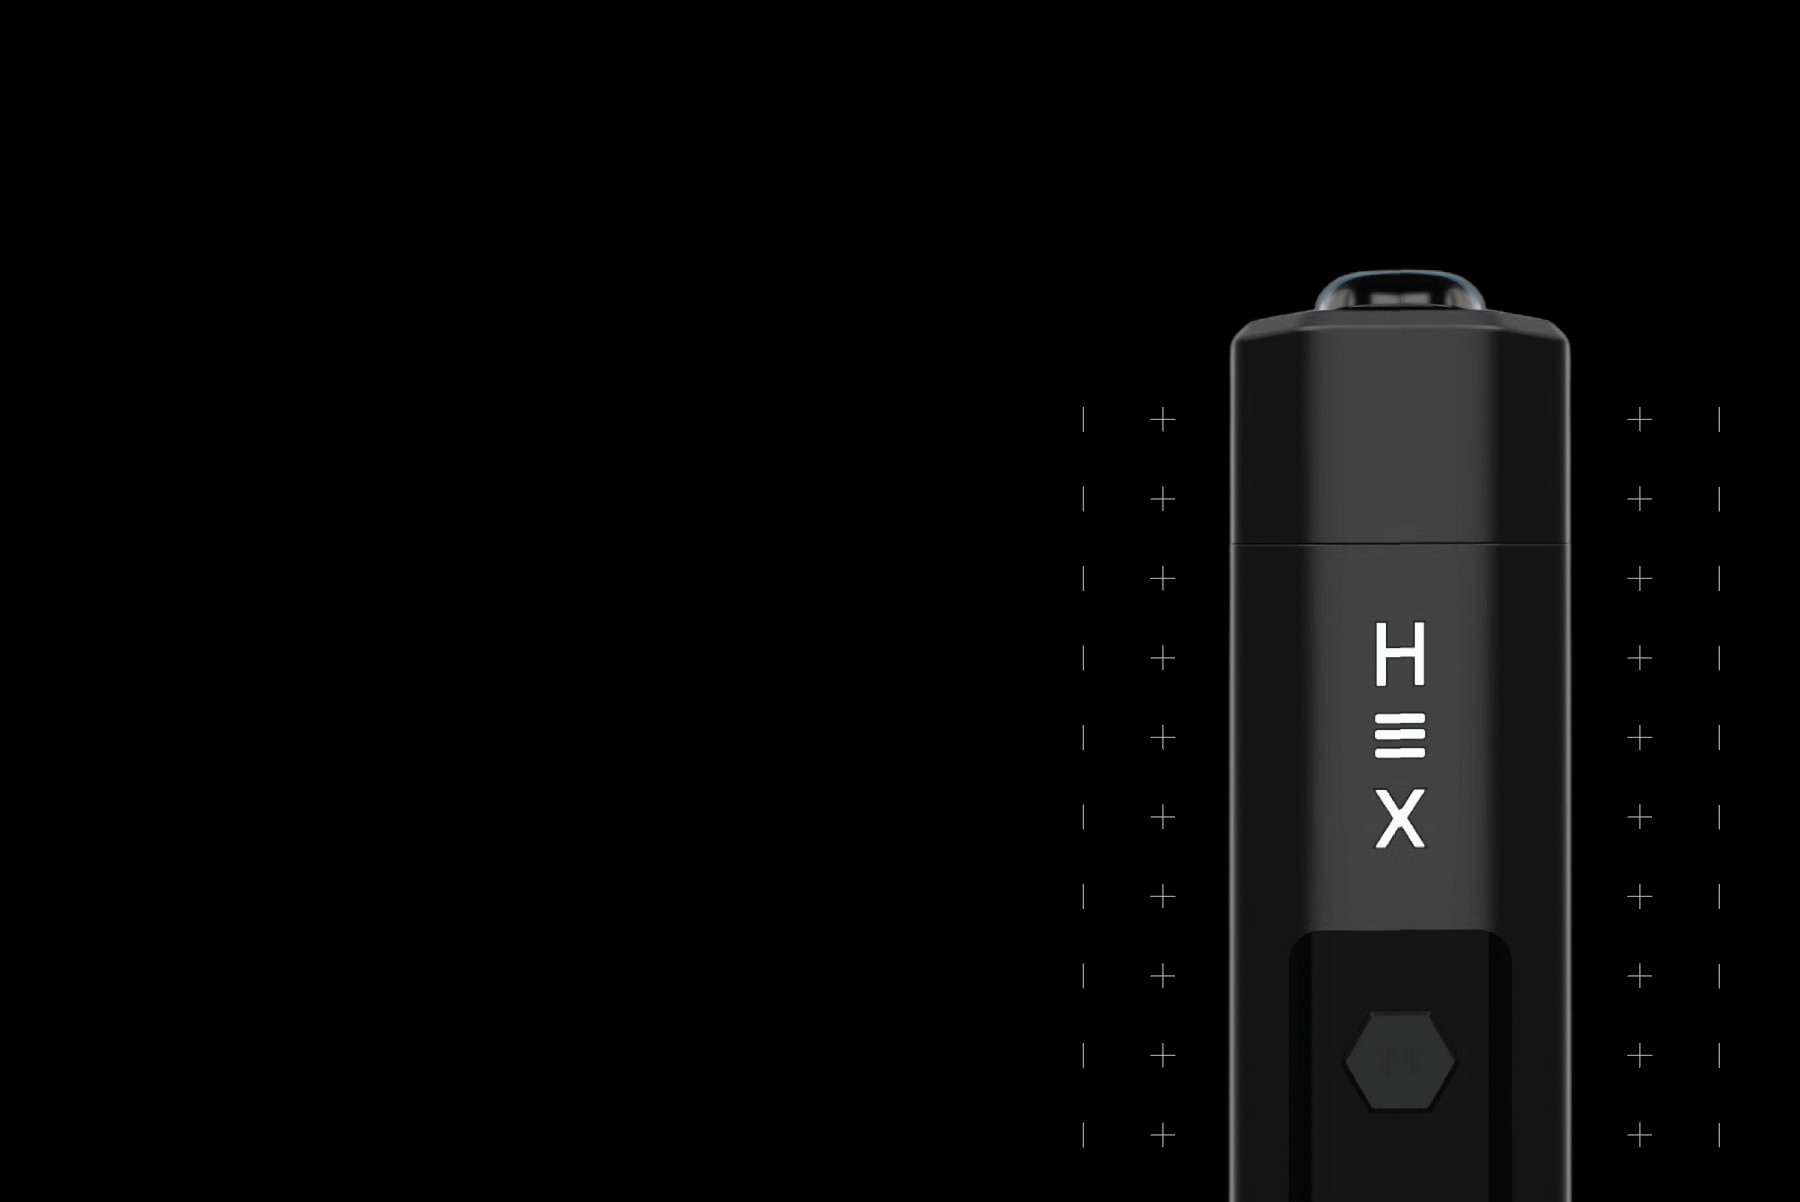 <h1><strong>“Possibly The Most Disruptive Vaporizer On The Planet.”</strong></h1>
